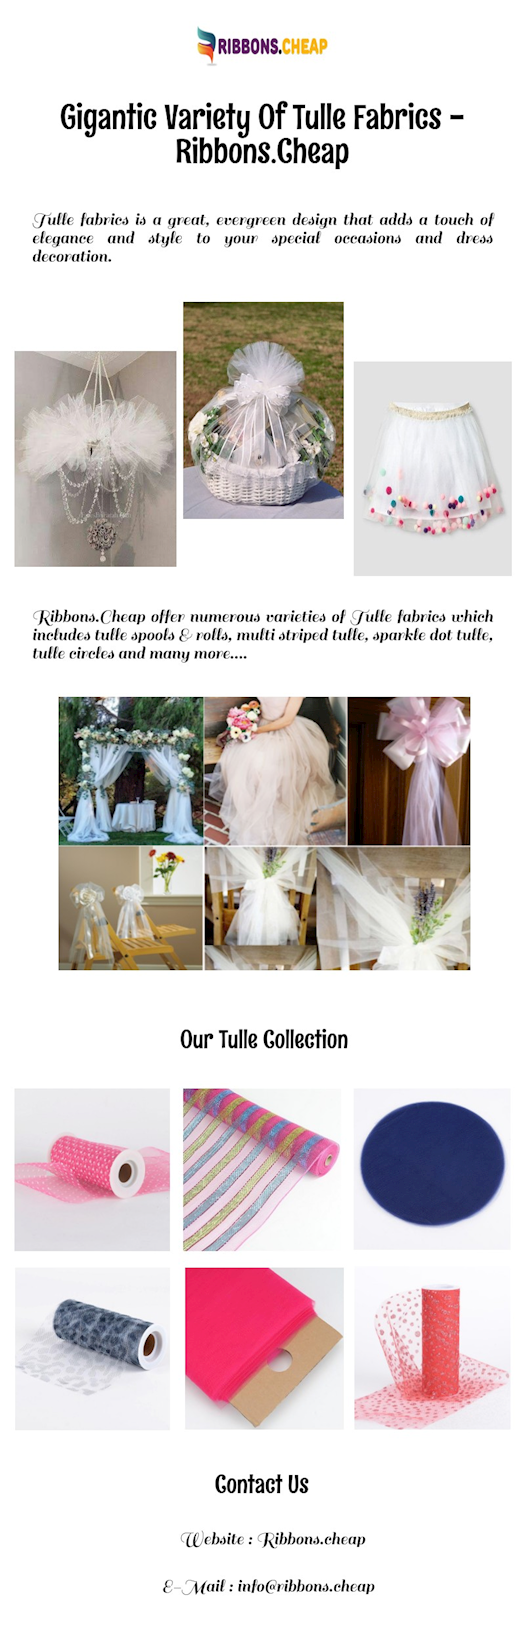 Gigantic Variety Of Tulle Fabrics - Ribbons.Cheap